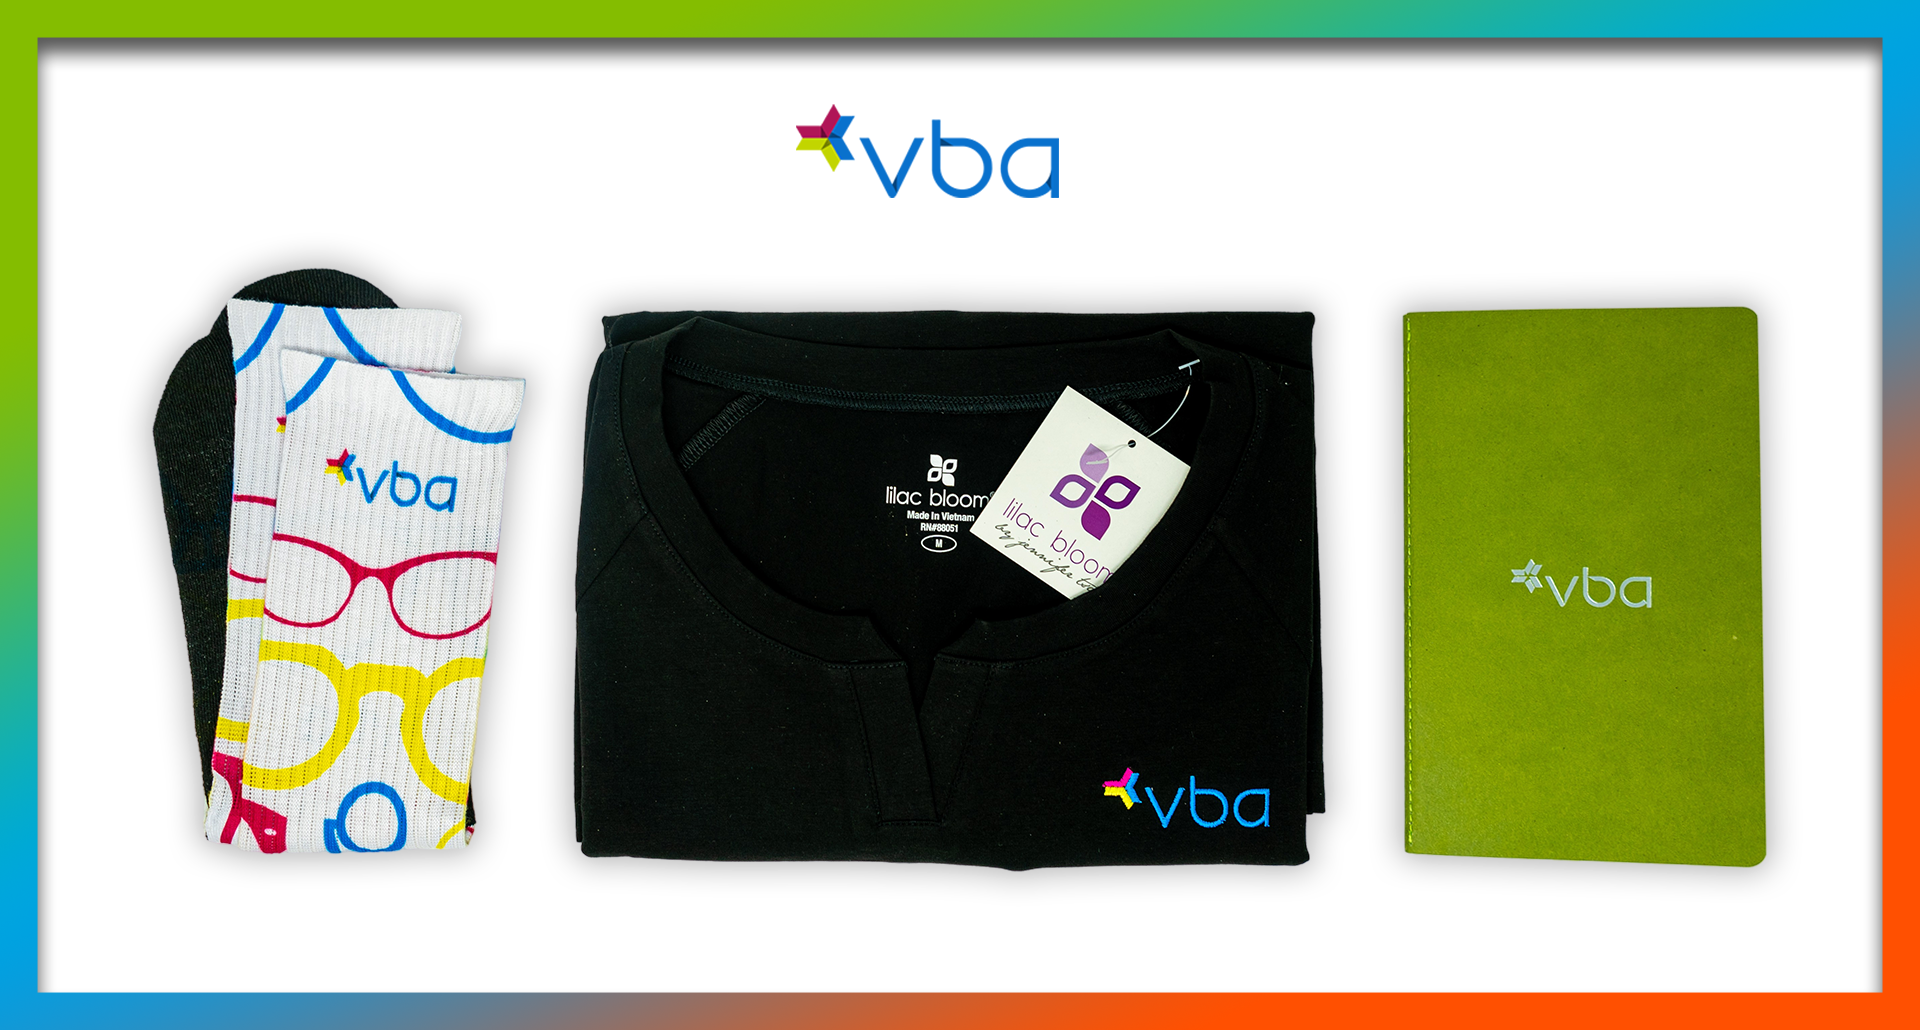 Case Study: Why VBA Decided to Lean on Adform for Logistics